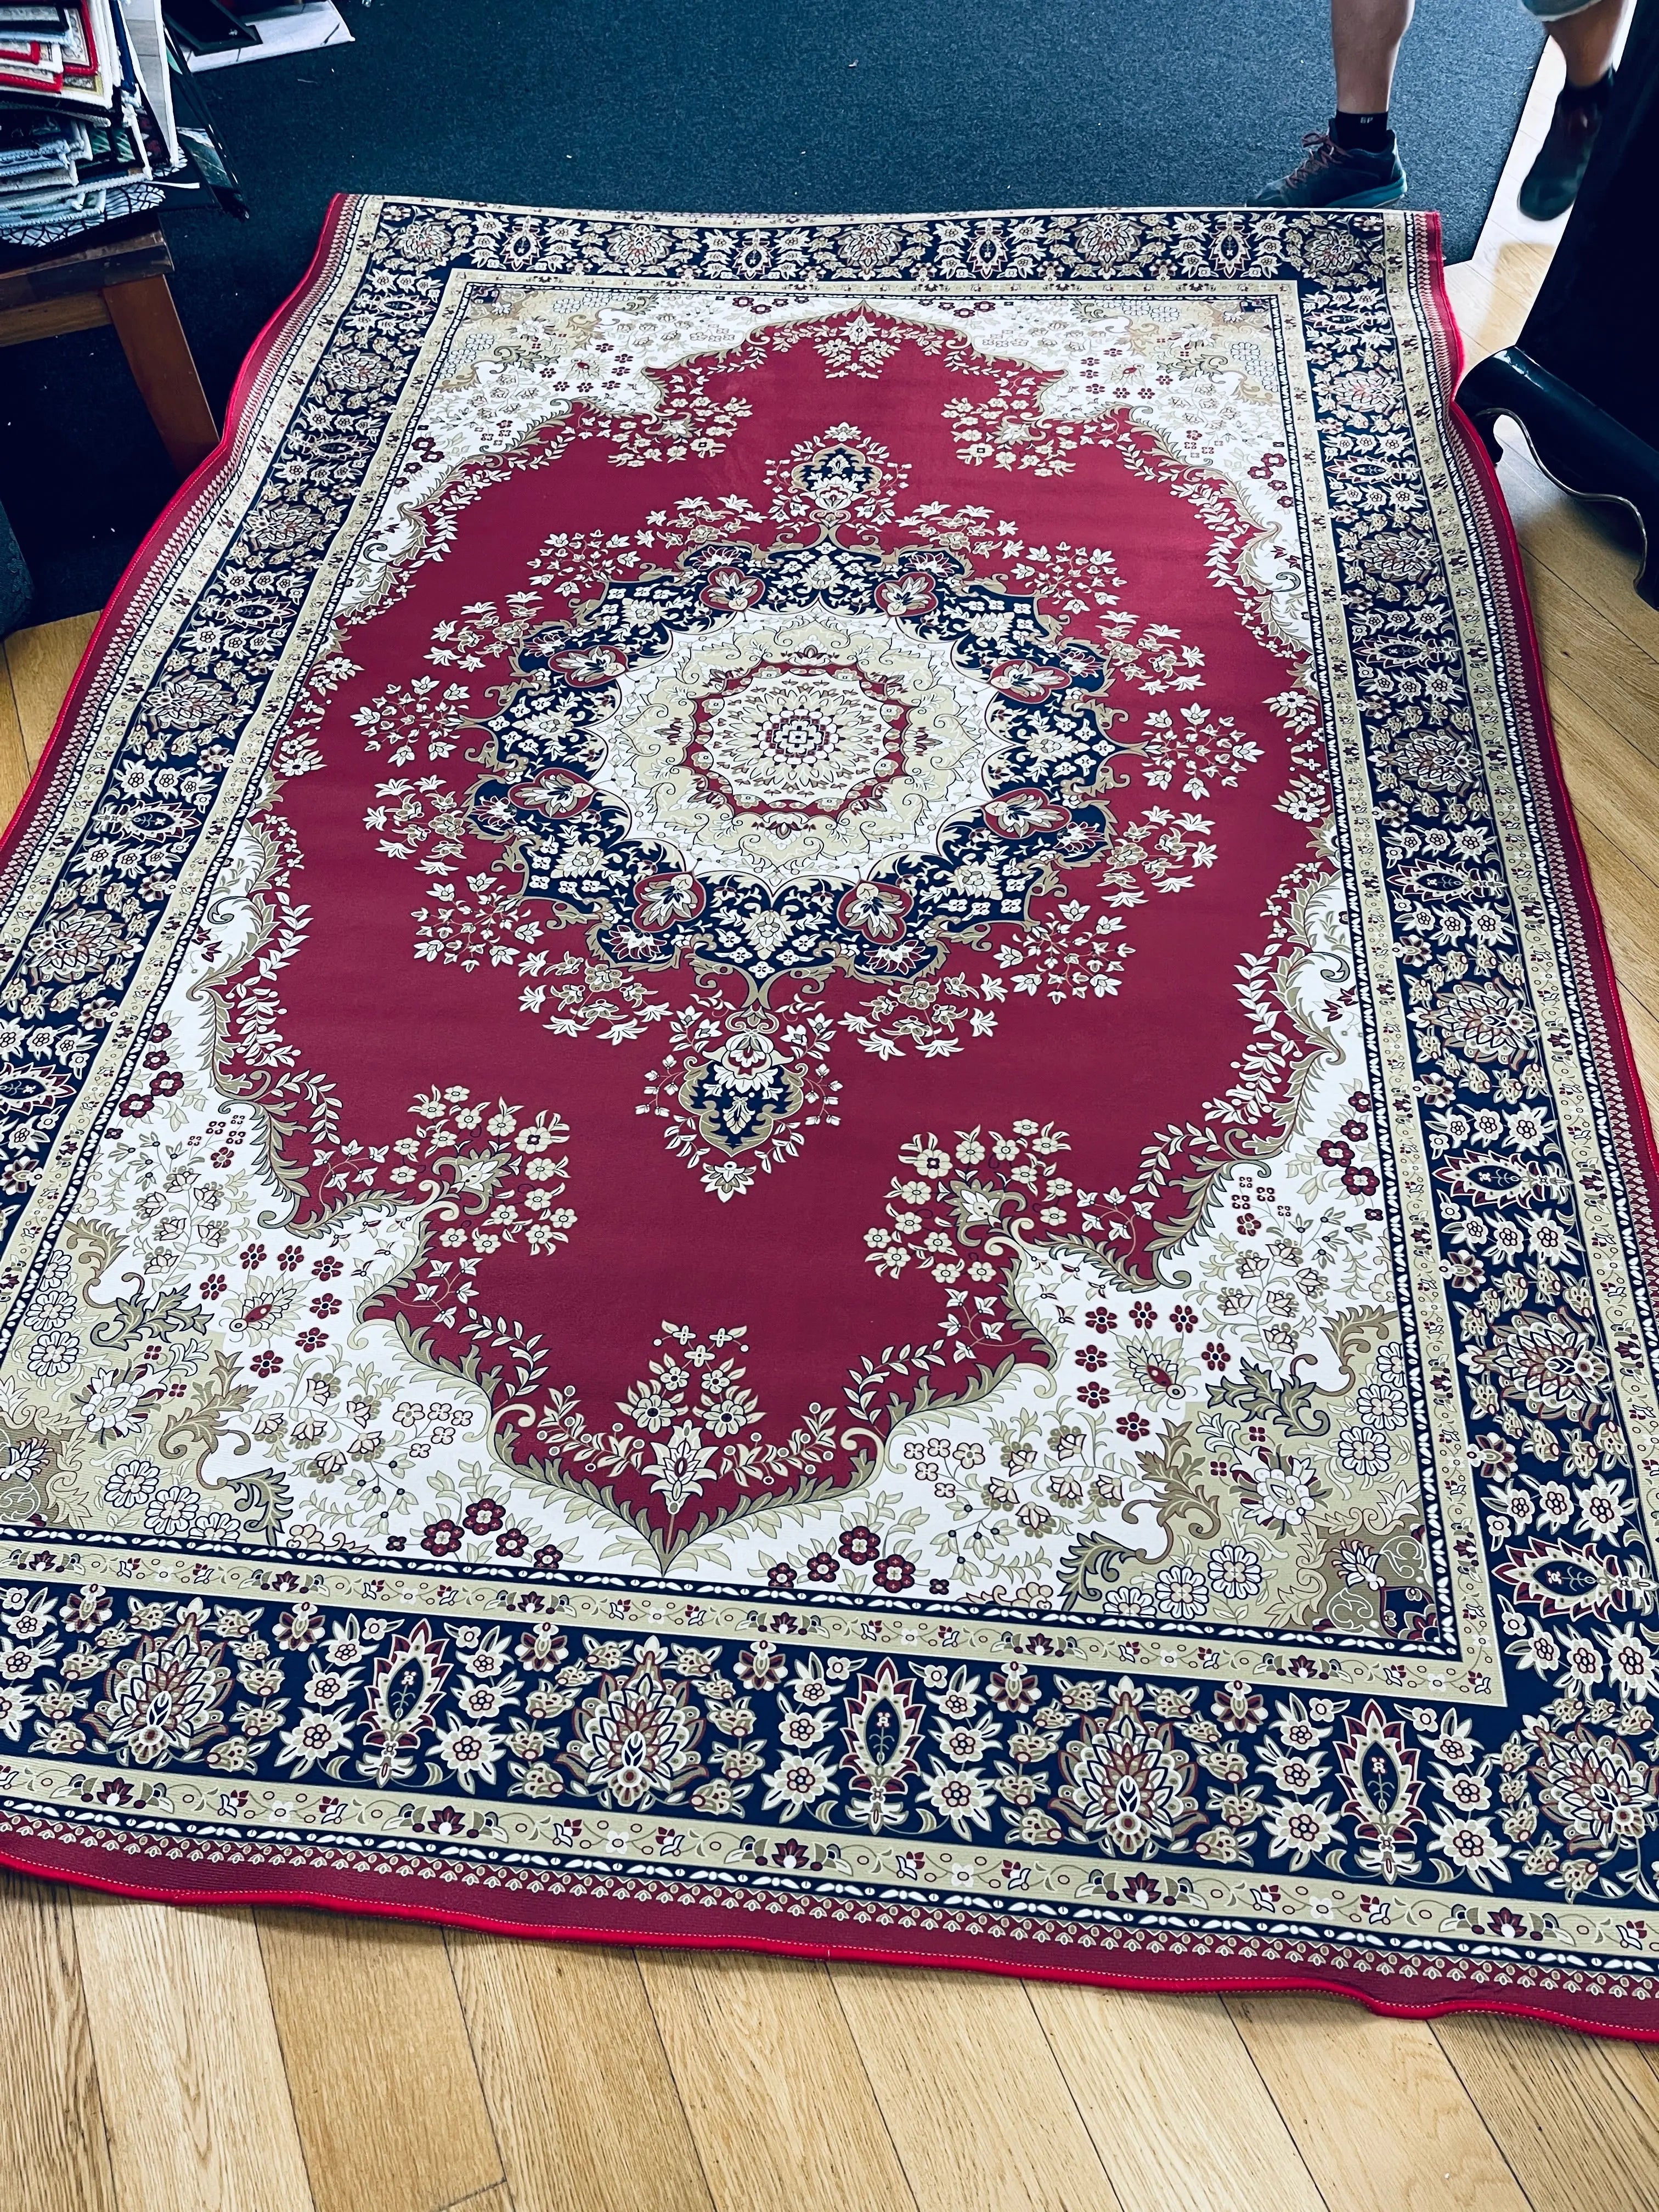 OS 64 Persian Style Rug The Carpet Maker